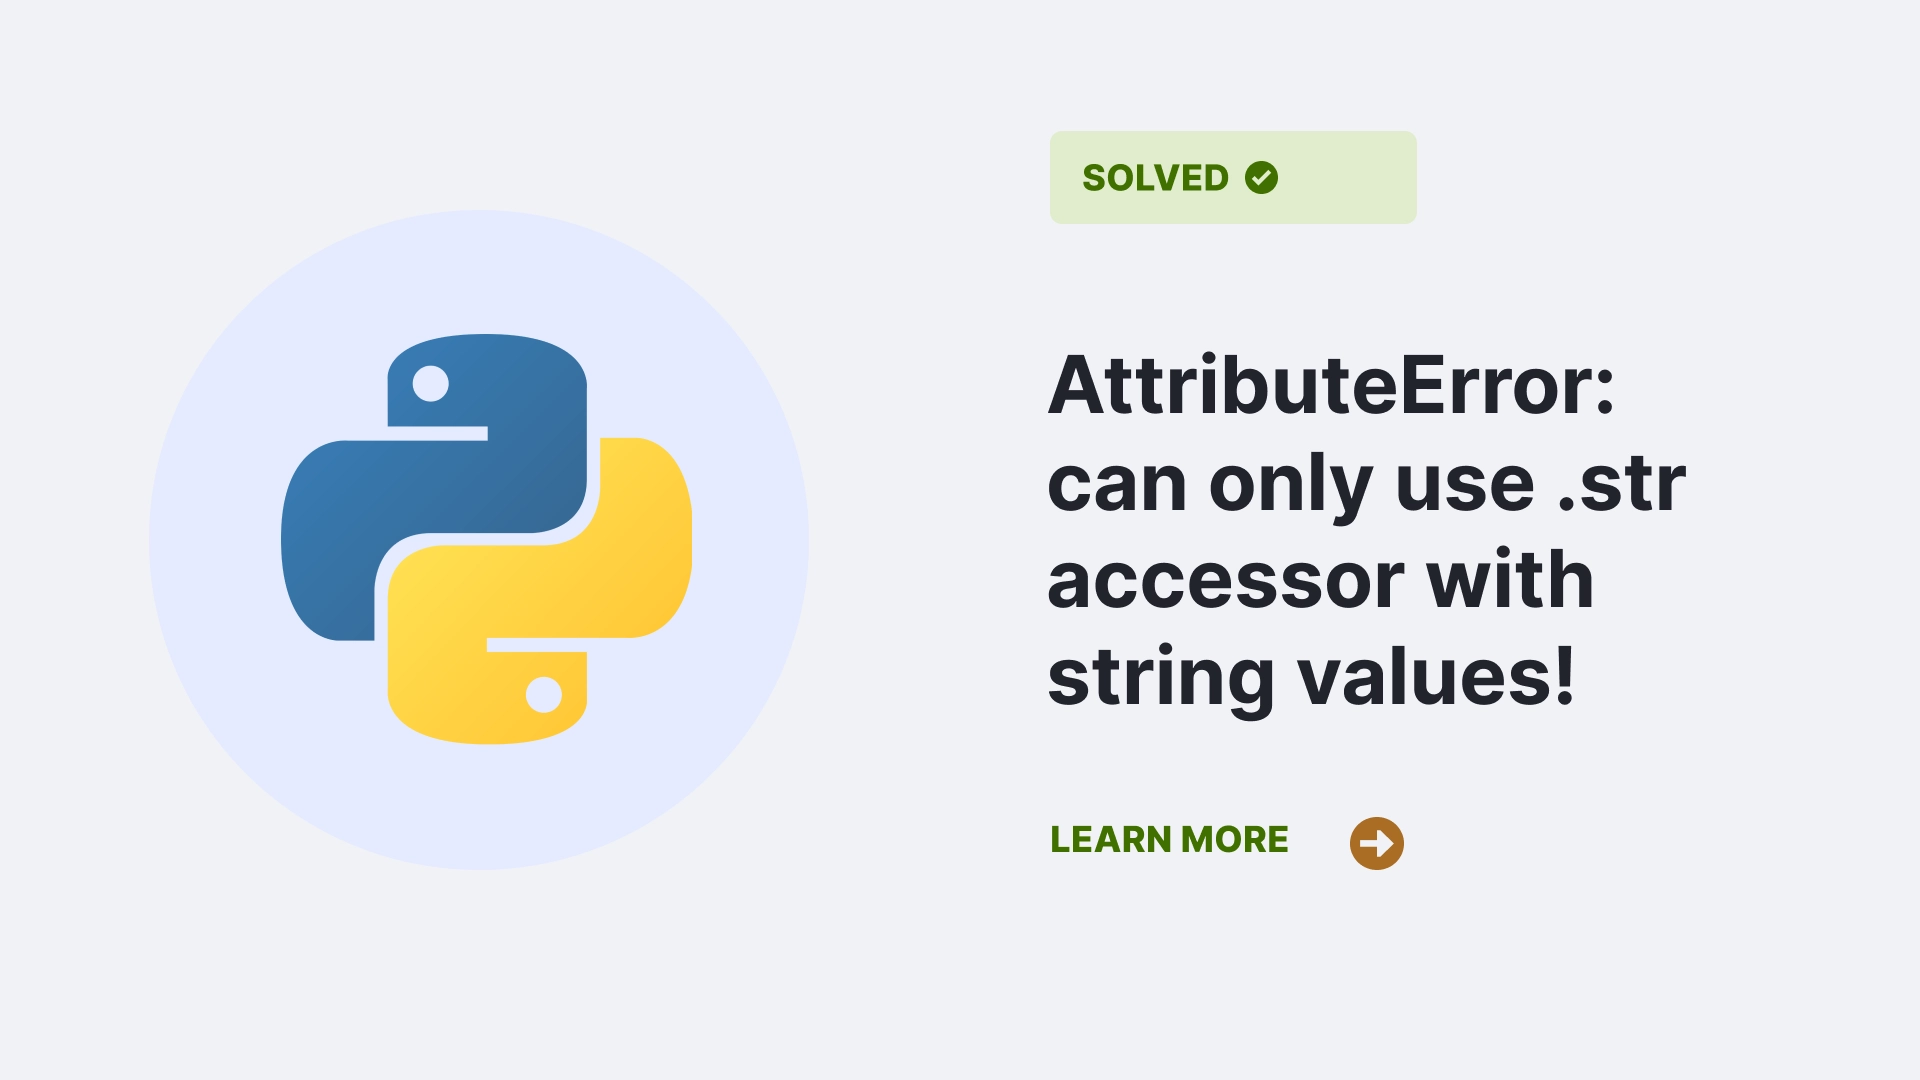 AttributeError: can only use .str accessor with string values!